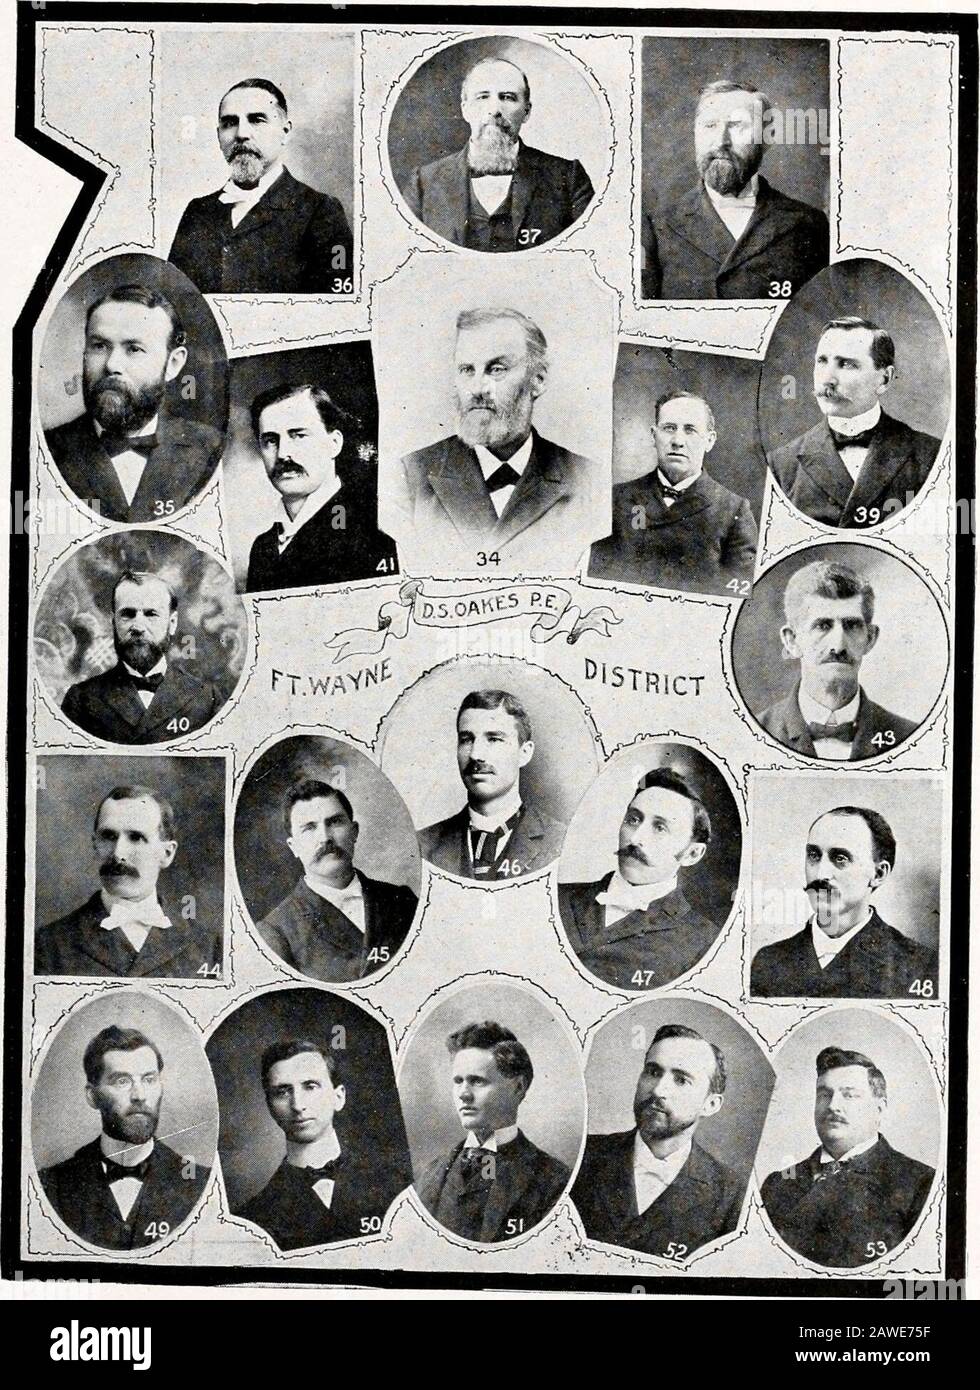 Historical data and life sketches of the deceased ministers of the Indiana Conference of the Evangelical Association, 1835 to 1915 . 14. S. H. Baumgaitner 15. Thos. Finkbeiner 16. J. O. Hosier 17. S. S. Albert 18. E. J. Nitsche 19. L. S. Fisher 20. W. S. Tracy 21. James Wales 22. W. G. Braeckly 23. H. H. Reinoehl 24. F. Waliiier 25. P. L. Browns 26. J. W. Feller 27. E. Q. Laiideman 28. M. L. Scheidler 29. C. D. Kiggenberg 30. A. J. Wiesjahn 31. S. C. Cramer 32. F. F. McCliire 33. E. Werner 40 INDIANA CONFERENCE—1901. 34. D. S. Oakes 35. J. H. Evans 36. D. E. Maitz 37. H. Schleucher 38. J. E. S Stock Photo